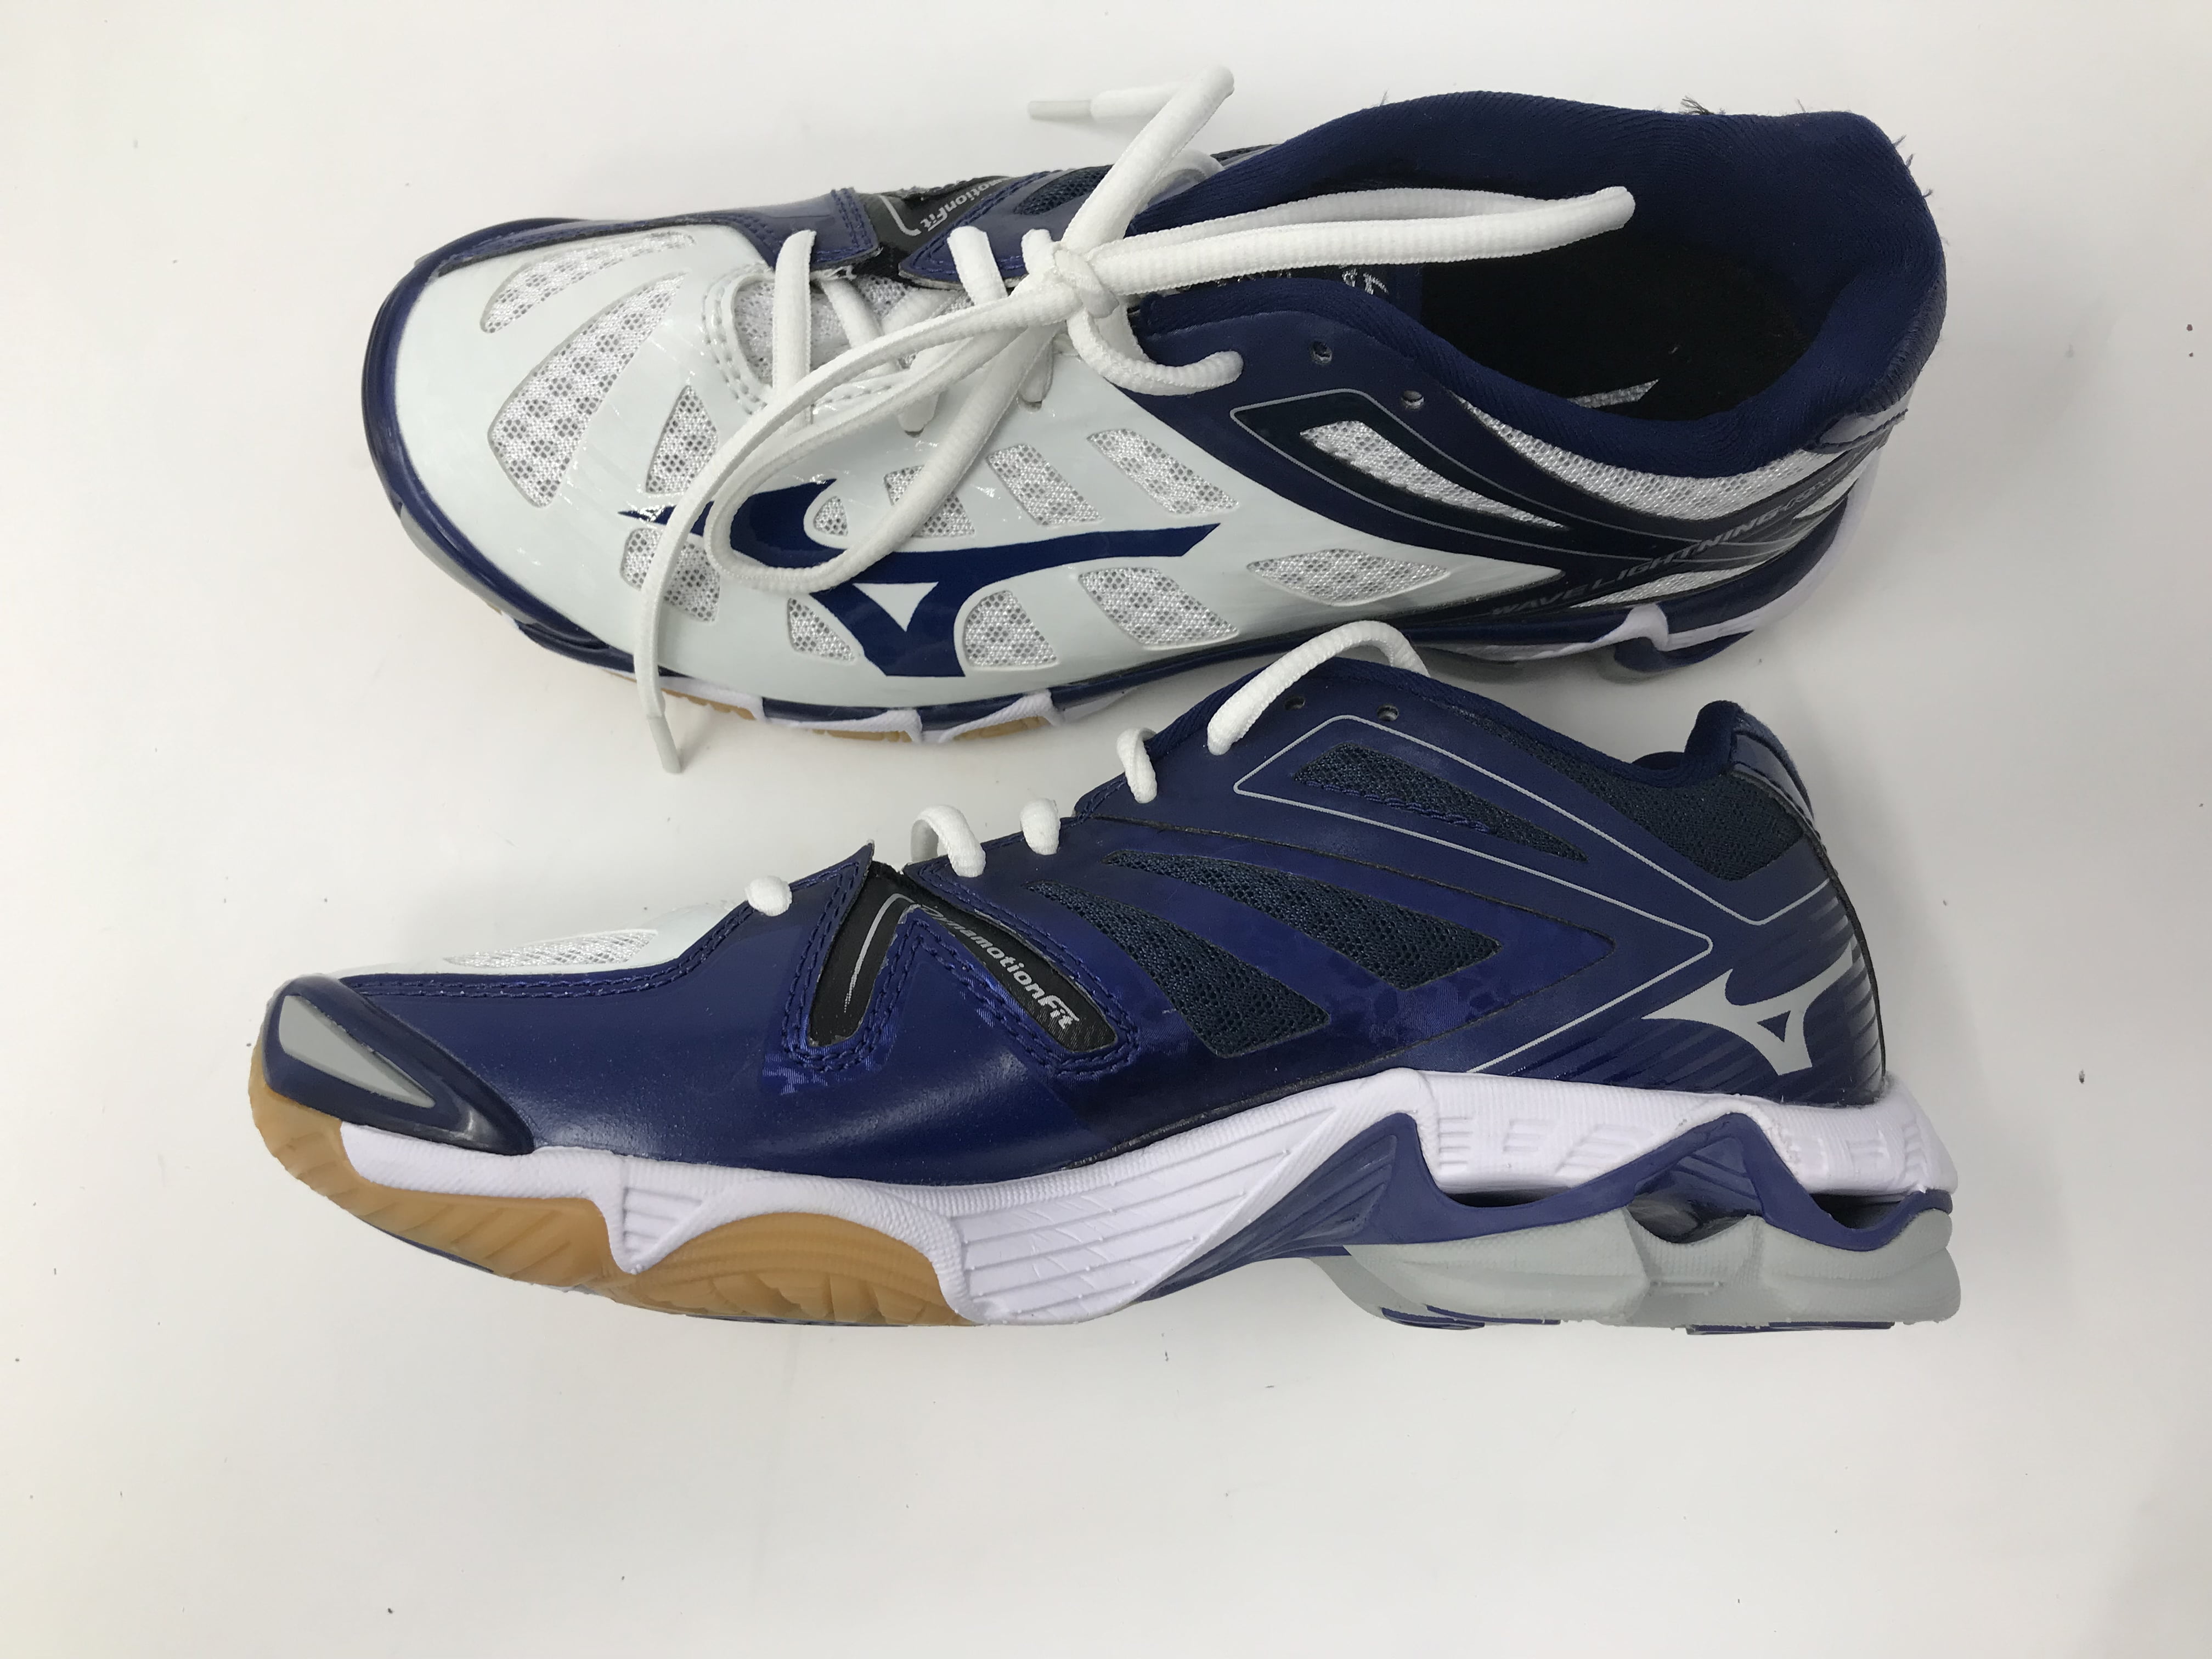 mizuno rx3 women's volleyball shoes